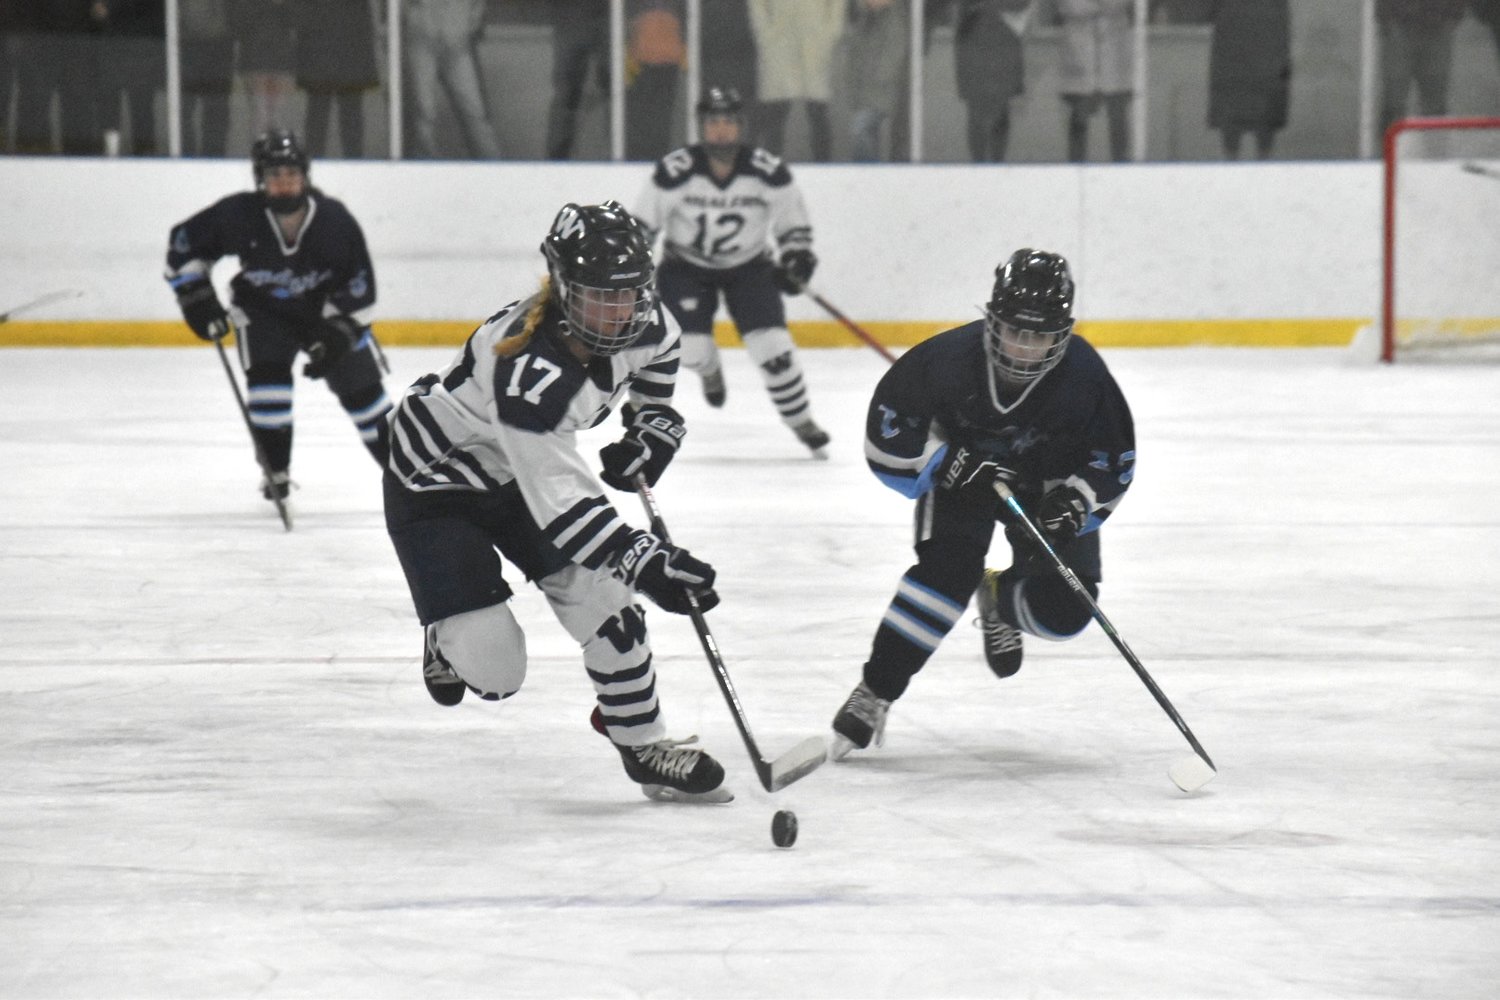 Bailey Lower carries the puck into the offensive zone during Saturday's game against Sandwich.